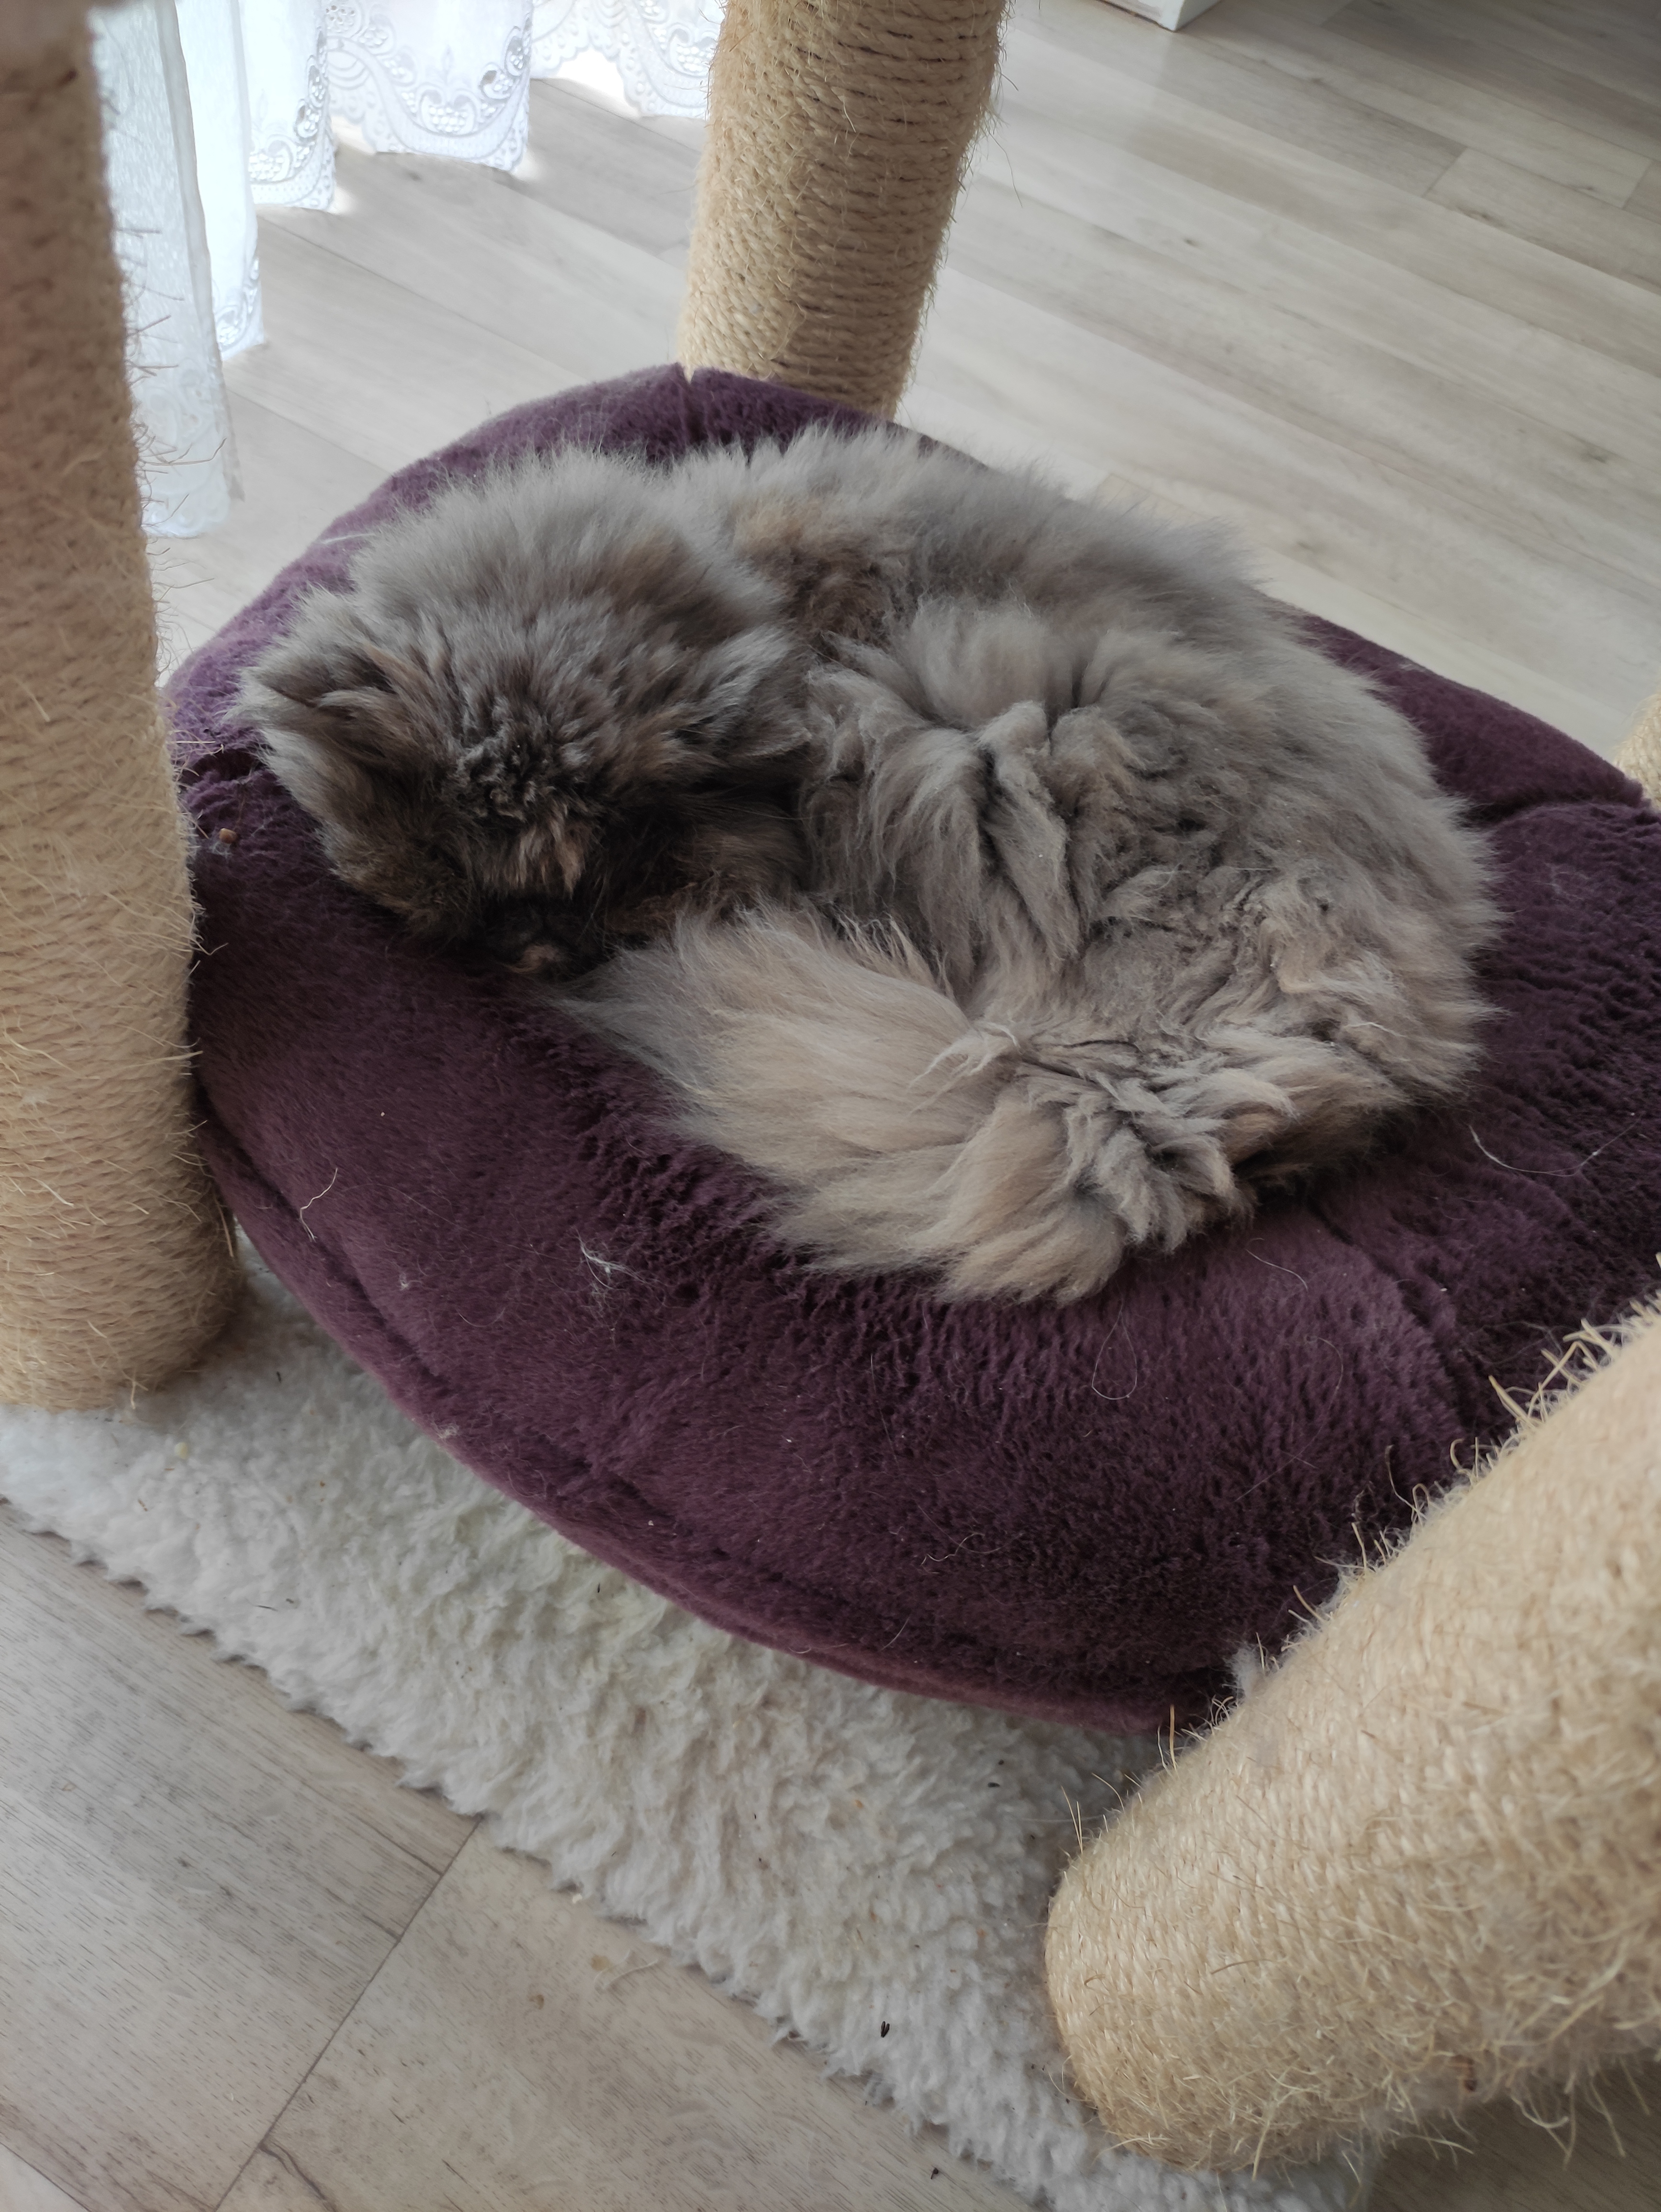 A grey cat sleeping in a purple donut shaped cat bed